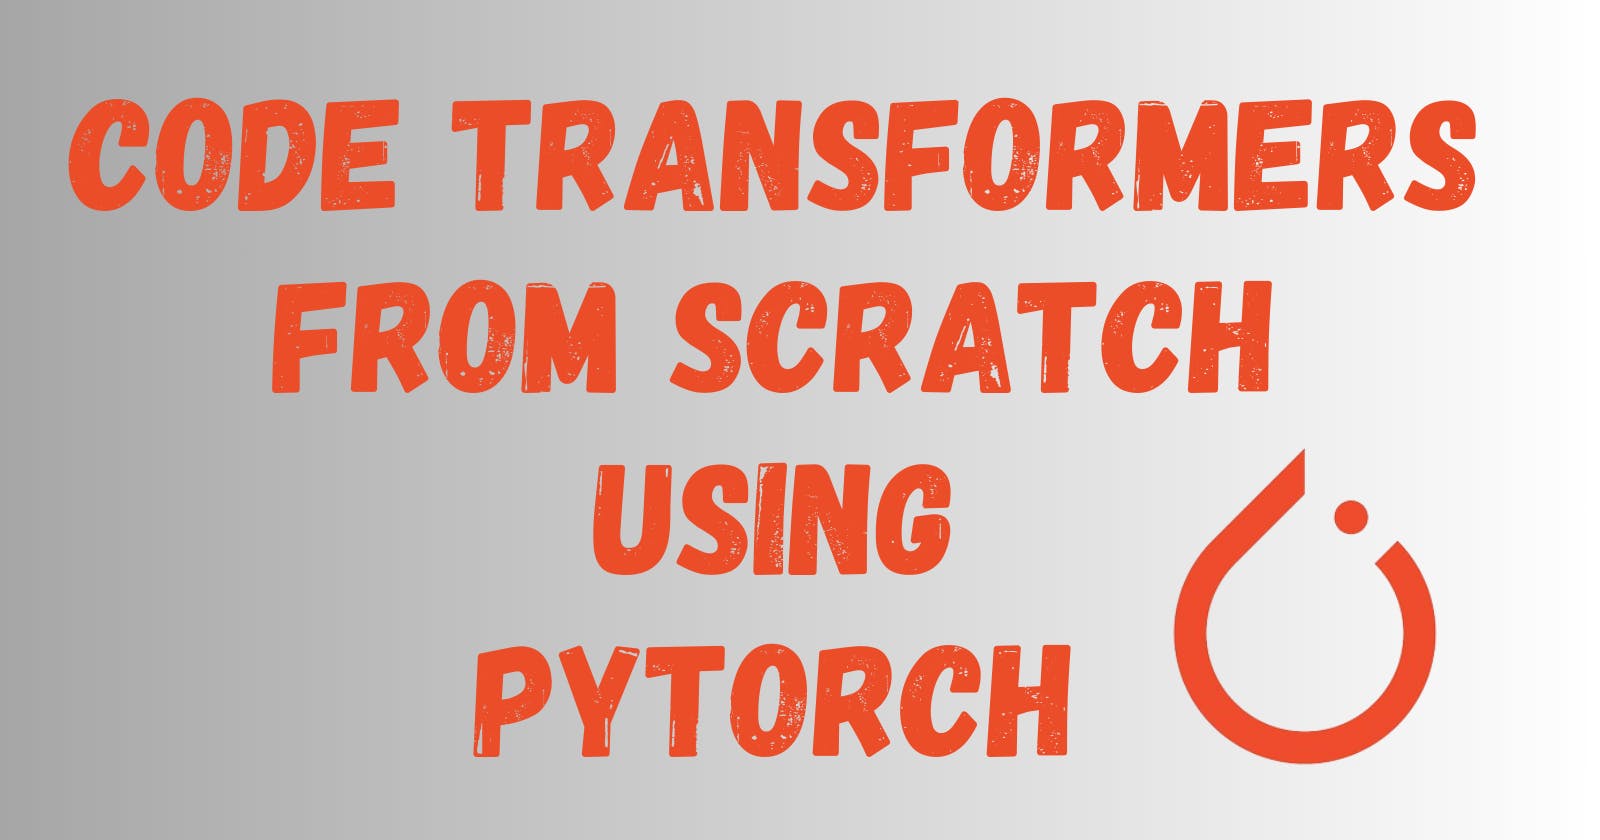 Build your own Transformer Model from Scratch using Pytorch